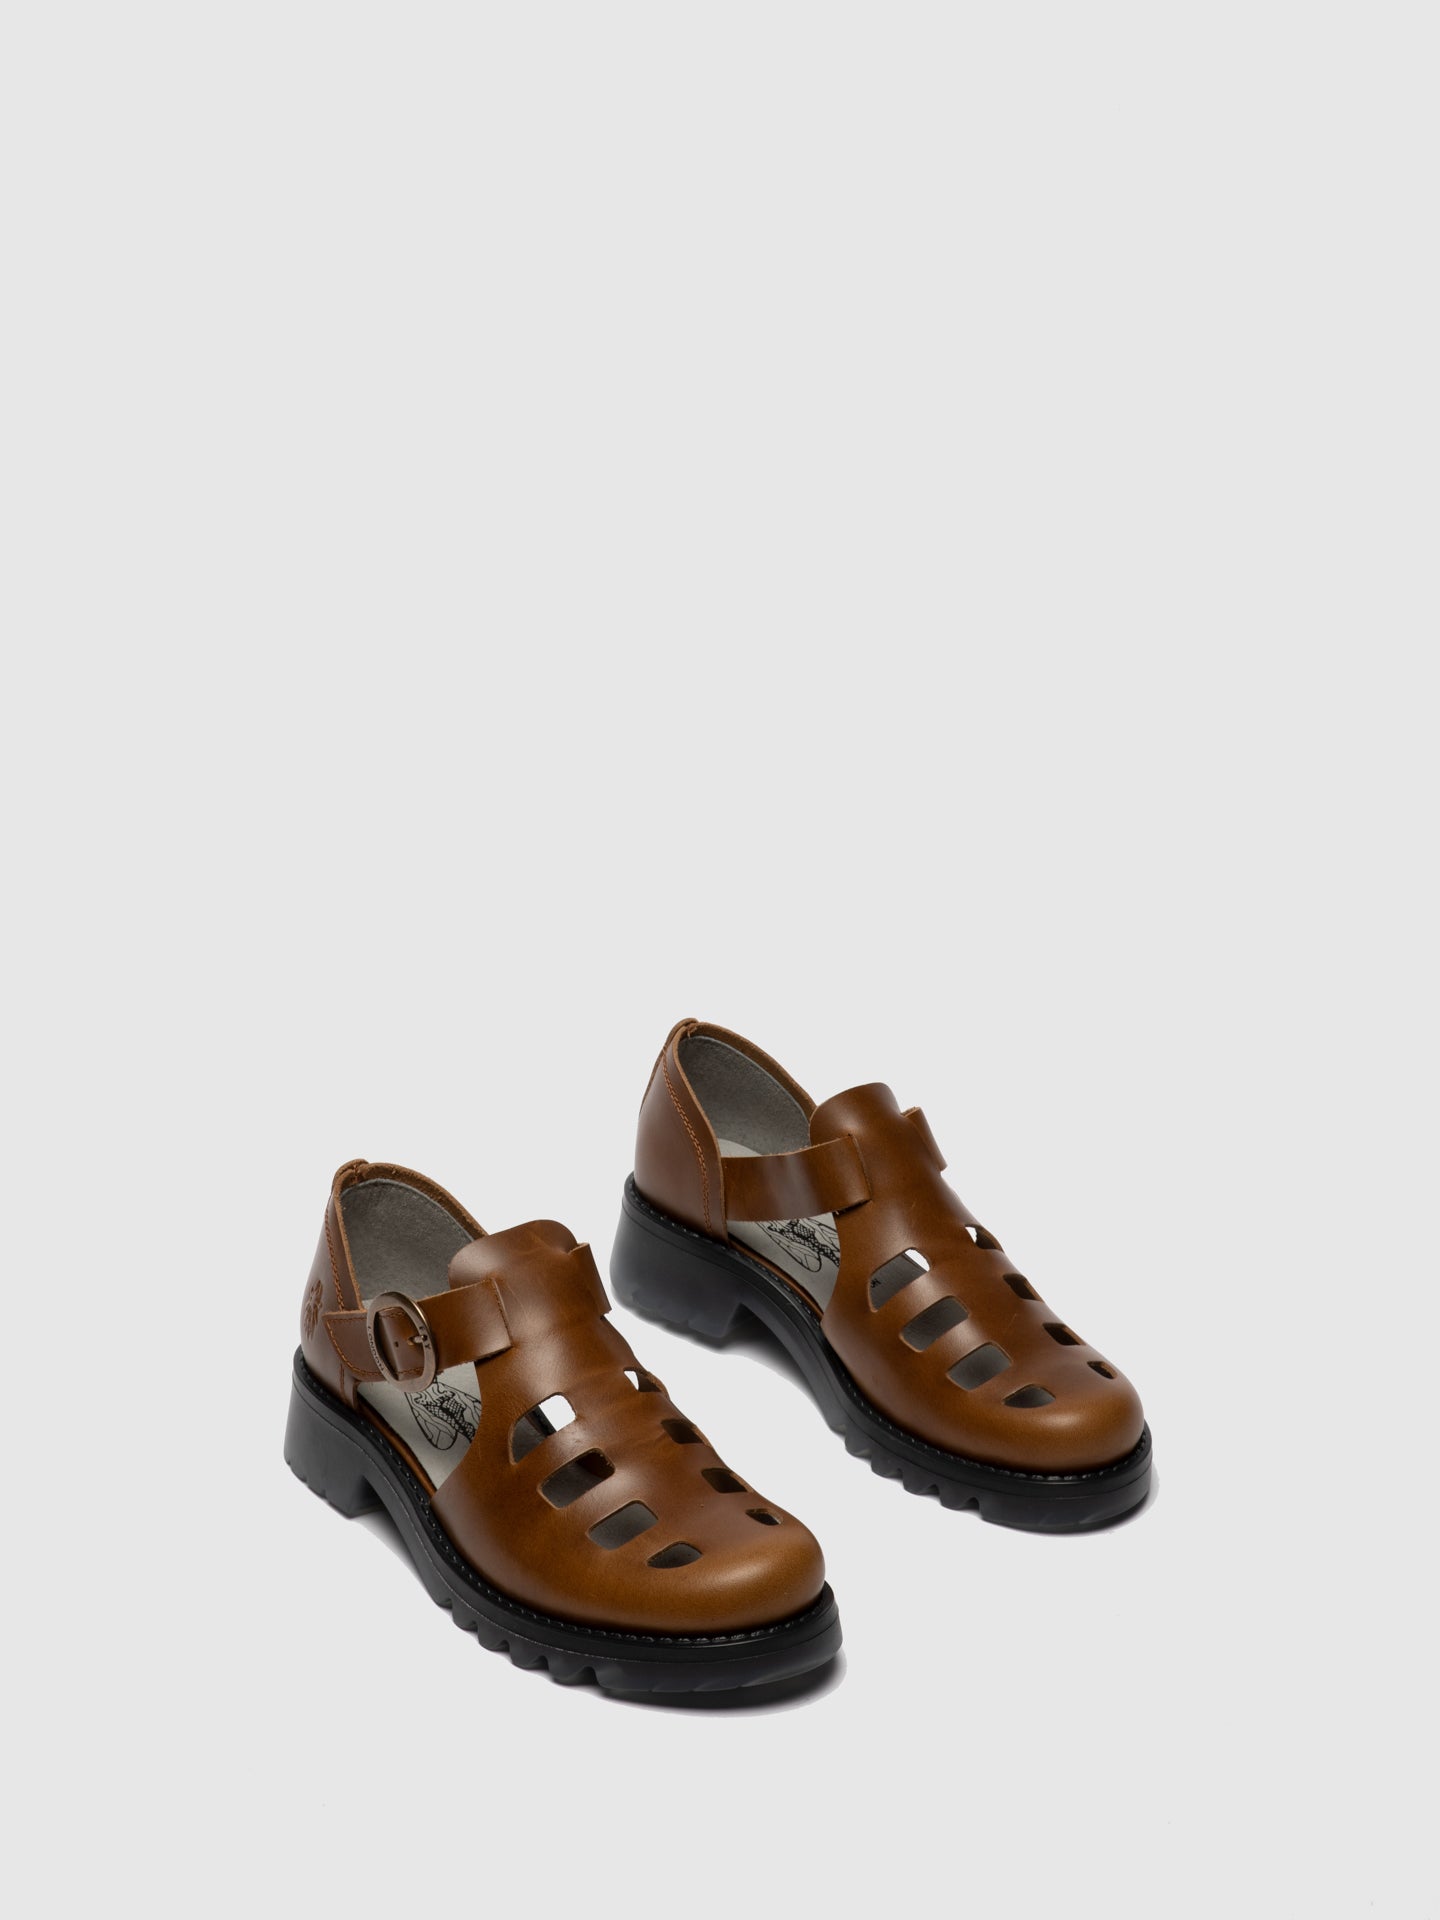 Fly London Camel Buckle Shoes